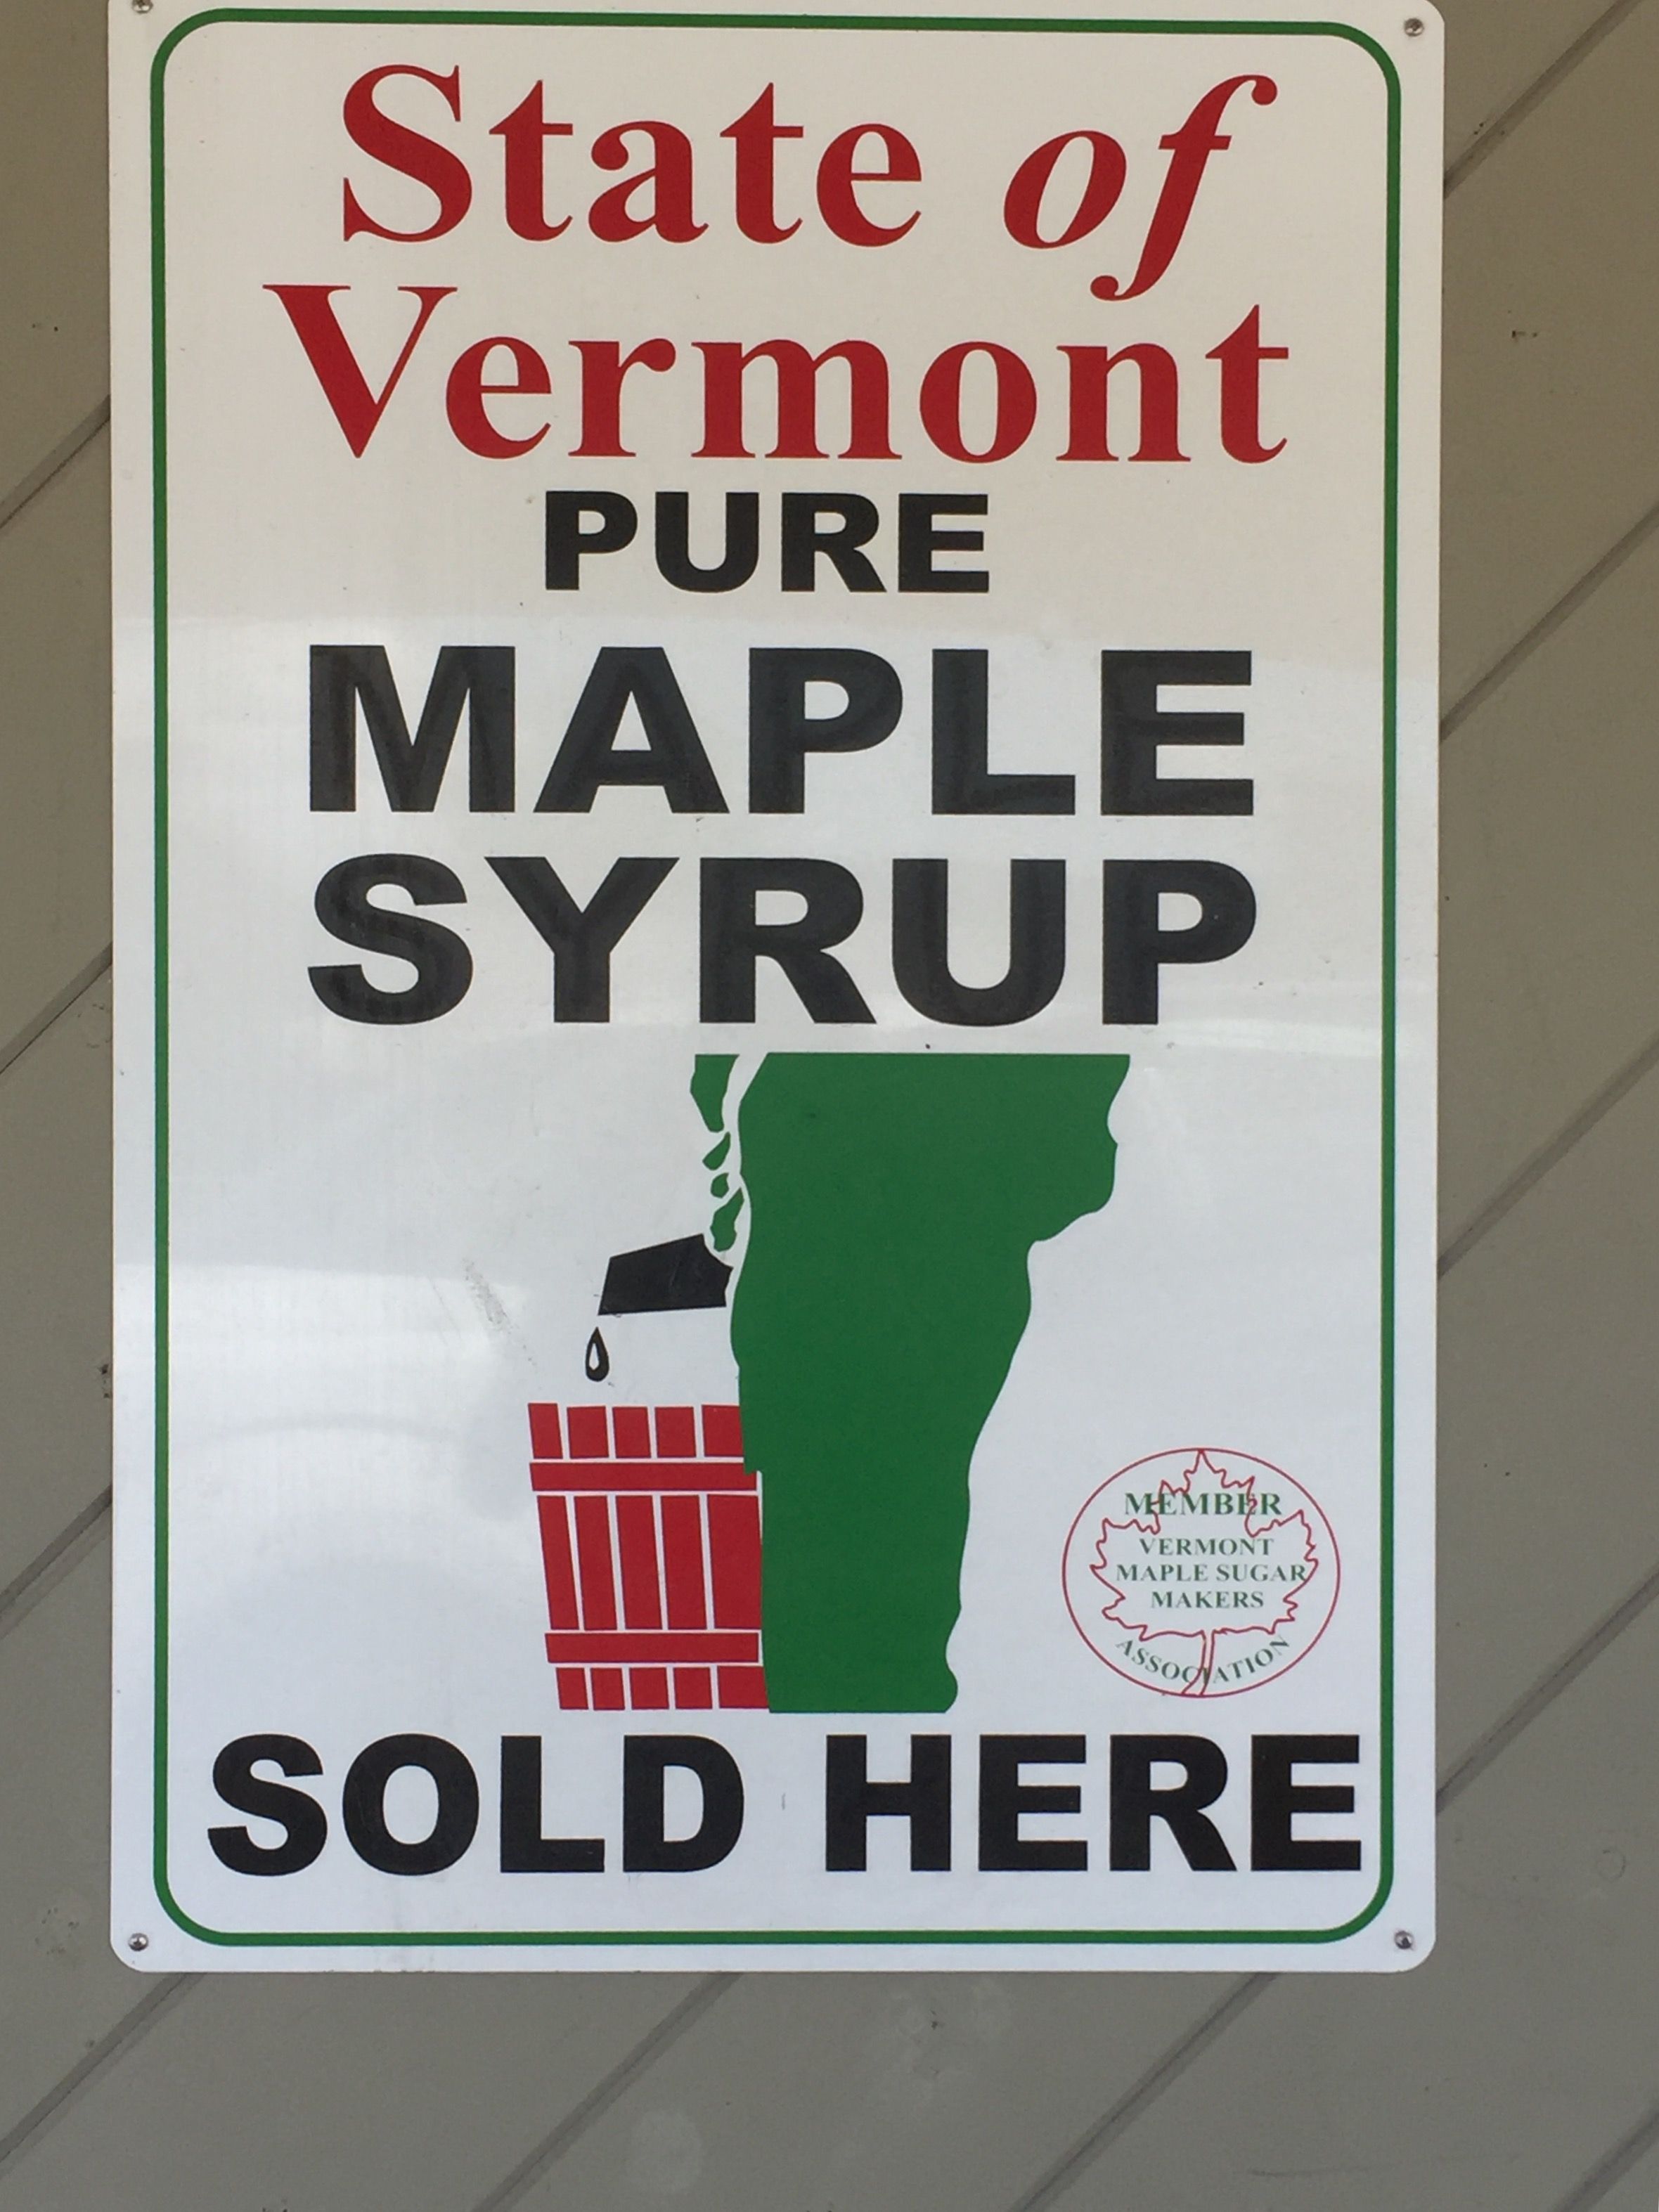 This may be the most unintentionally vulgar thing i've ever seen. And they're all over Vermont.